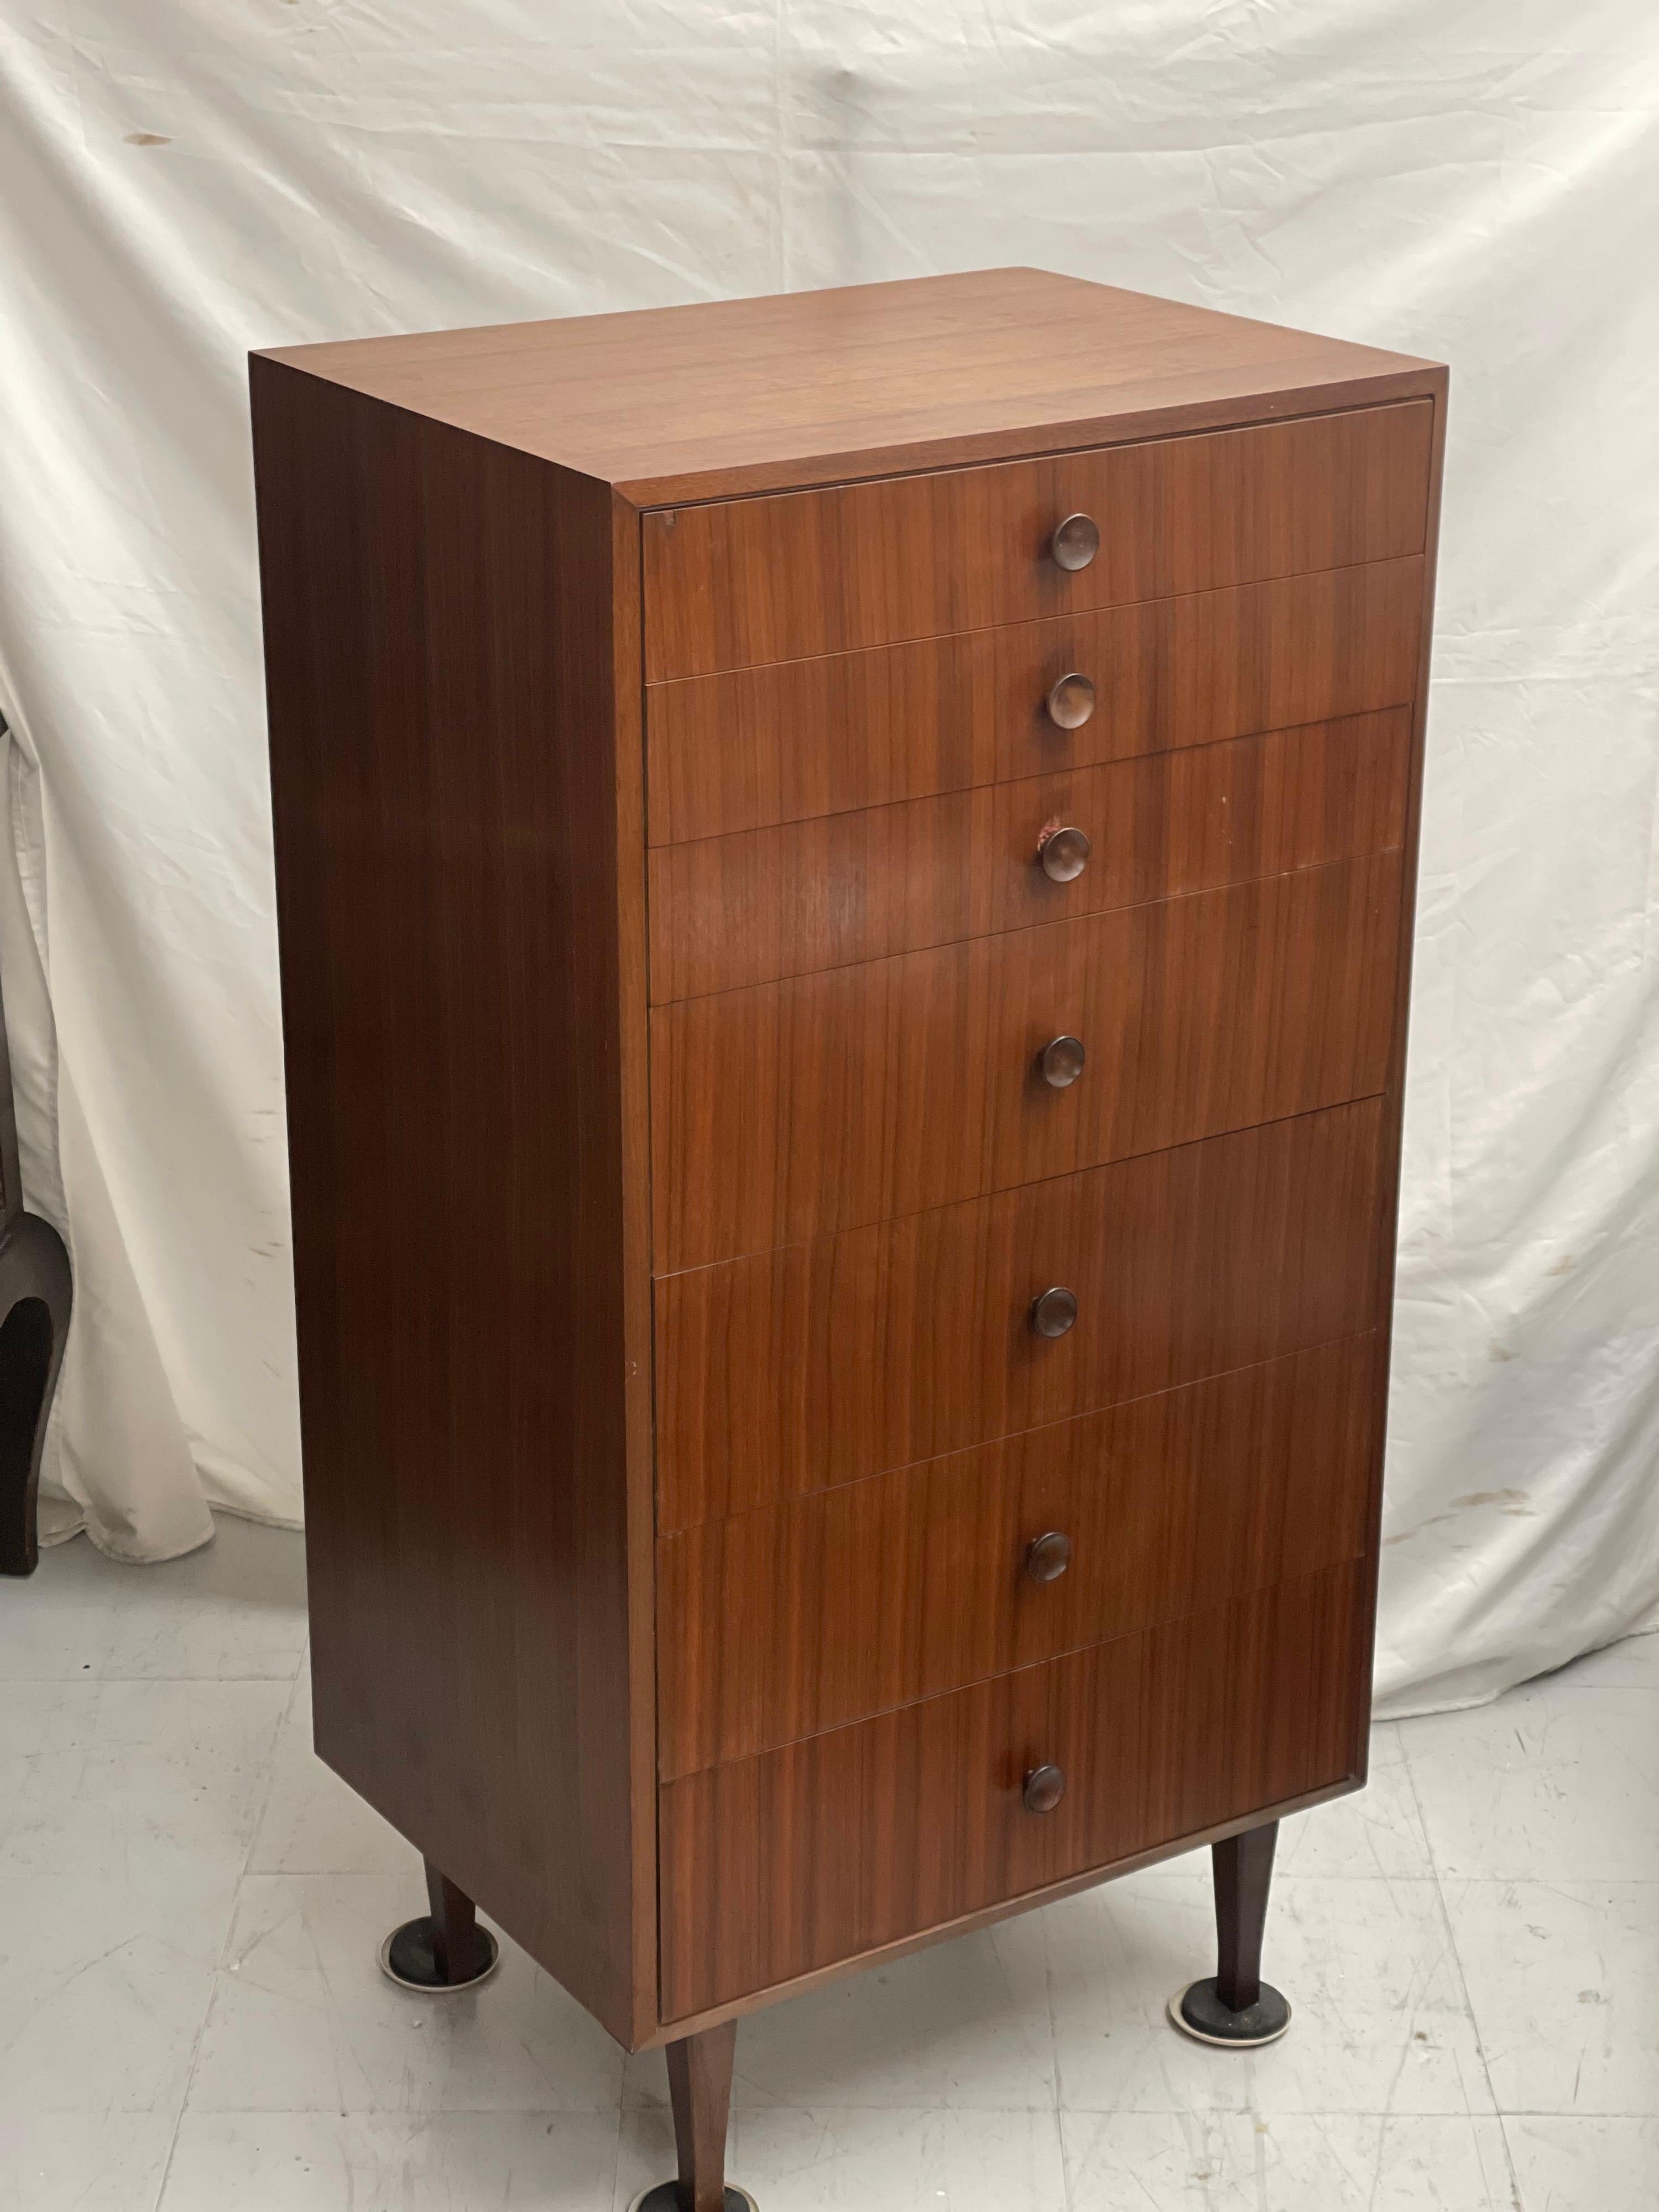 This is a vintage English dark walnut tall chest of drawers, tallboy or dressing chest with 7 drawers dating from the mid twentieth century. Approximate dimensions are 24 W 18 D 47 H.